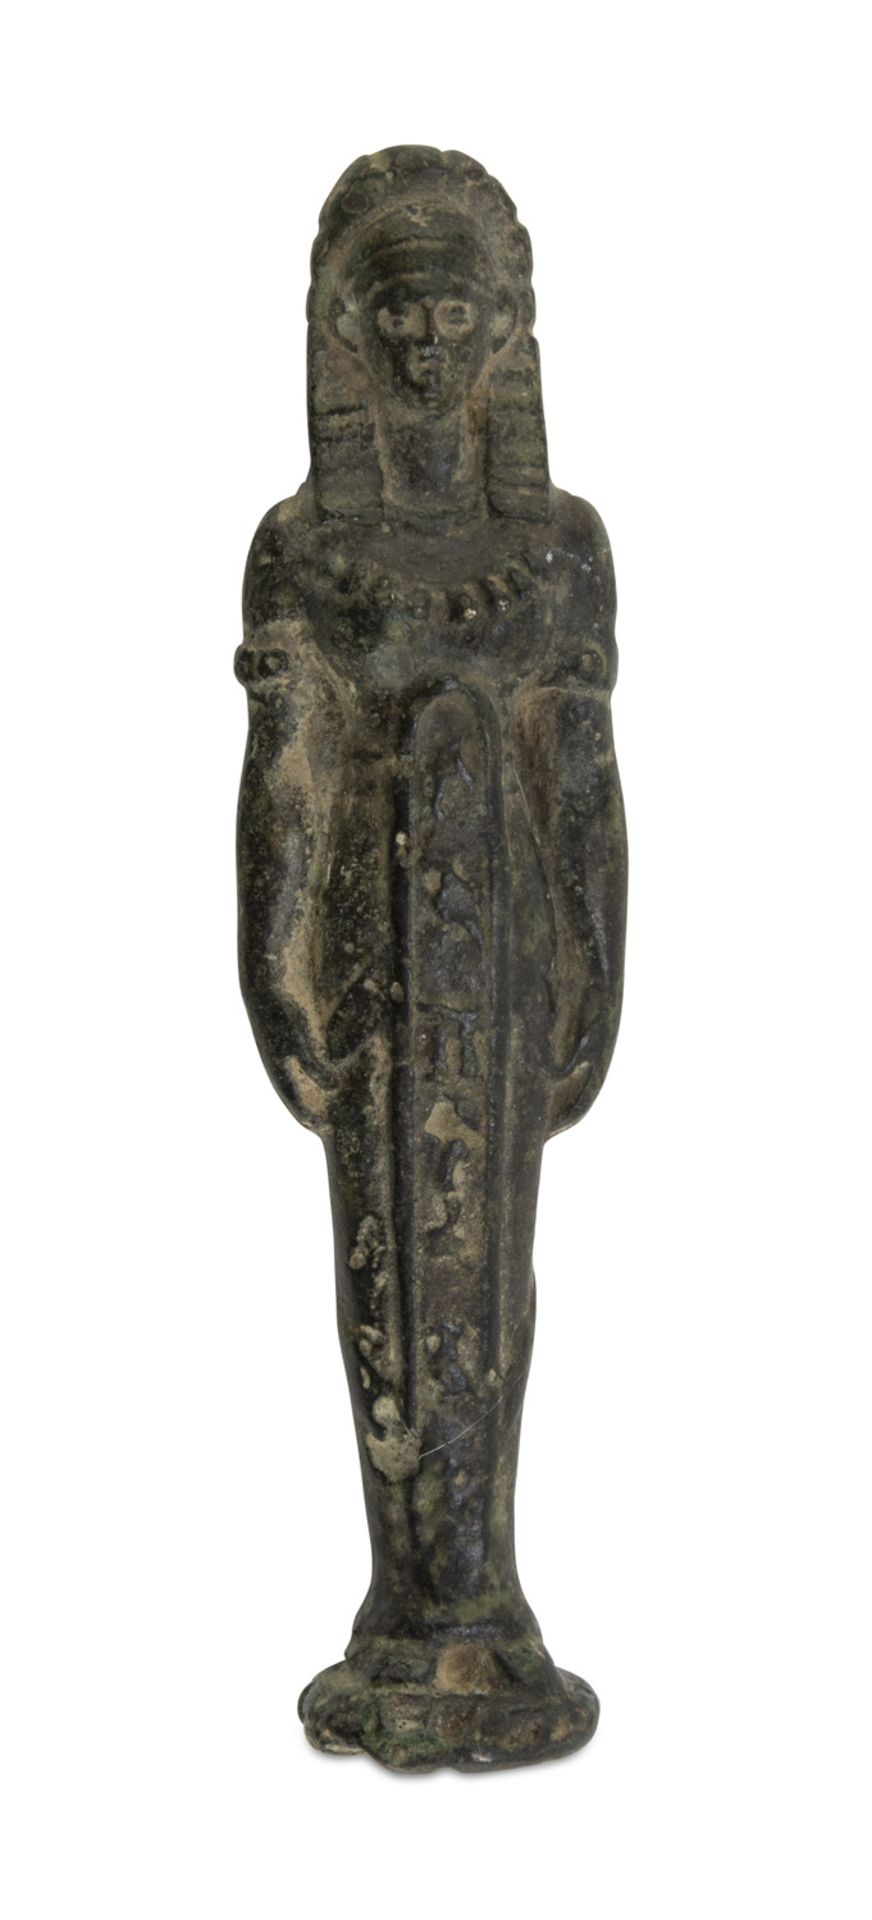 BRONZE USHABTI, EGYPTIAN STYLE, EARLY 20TH CENTURY engrave with pictographic motifs. h. cm. 12.